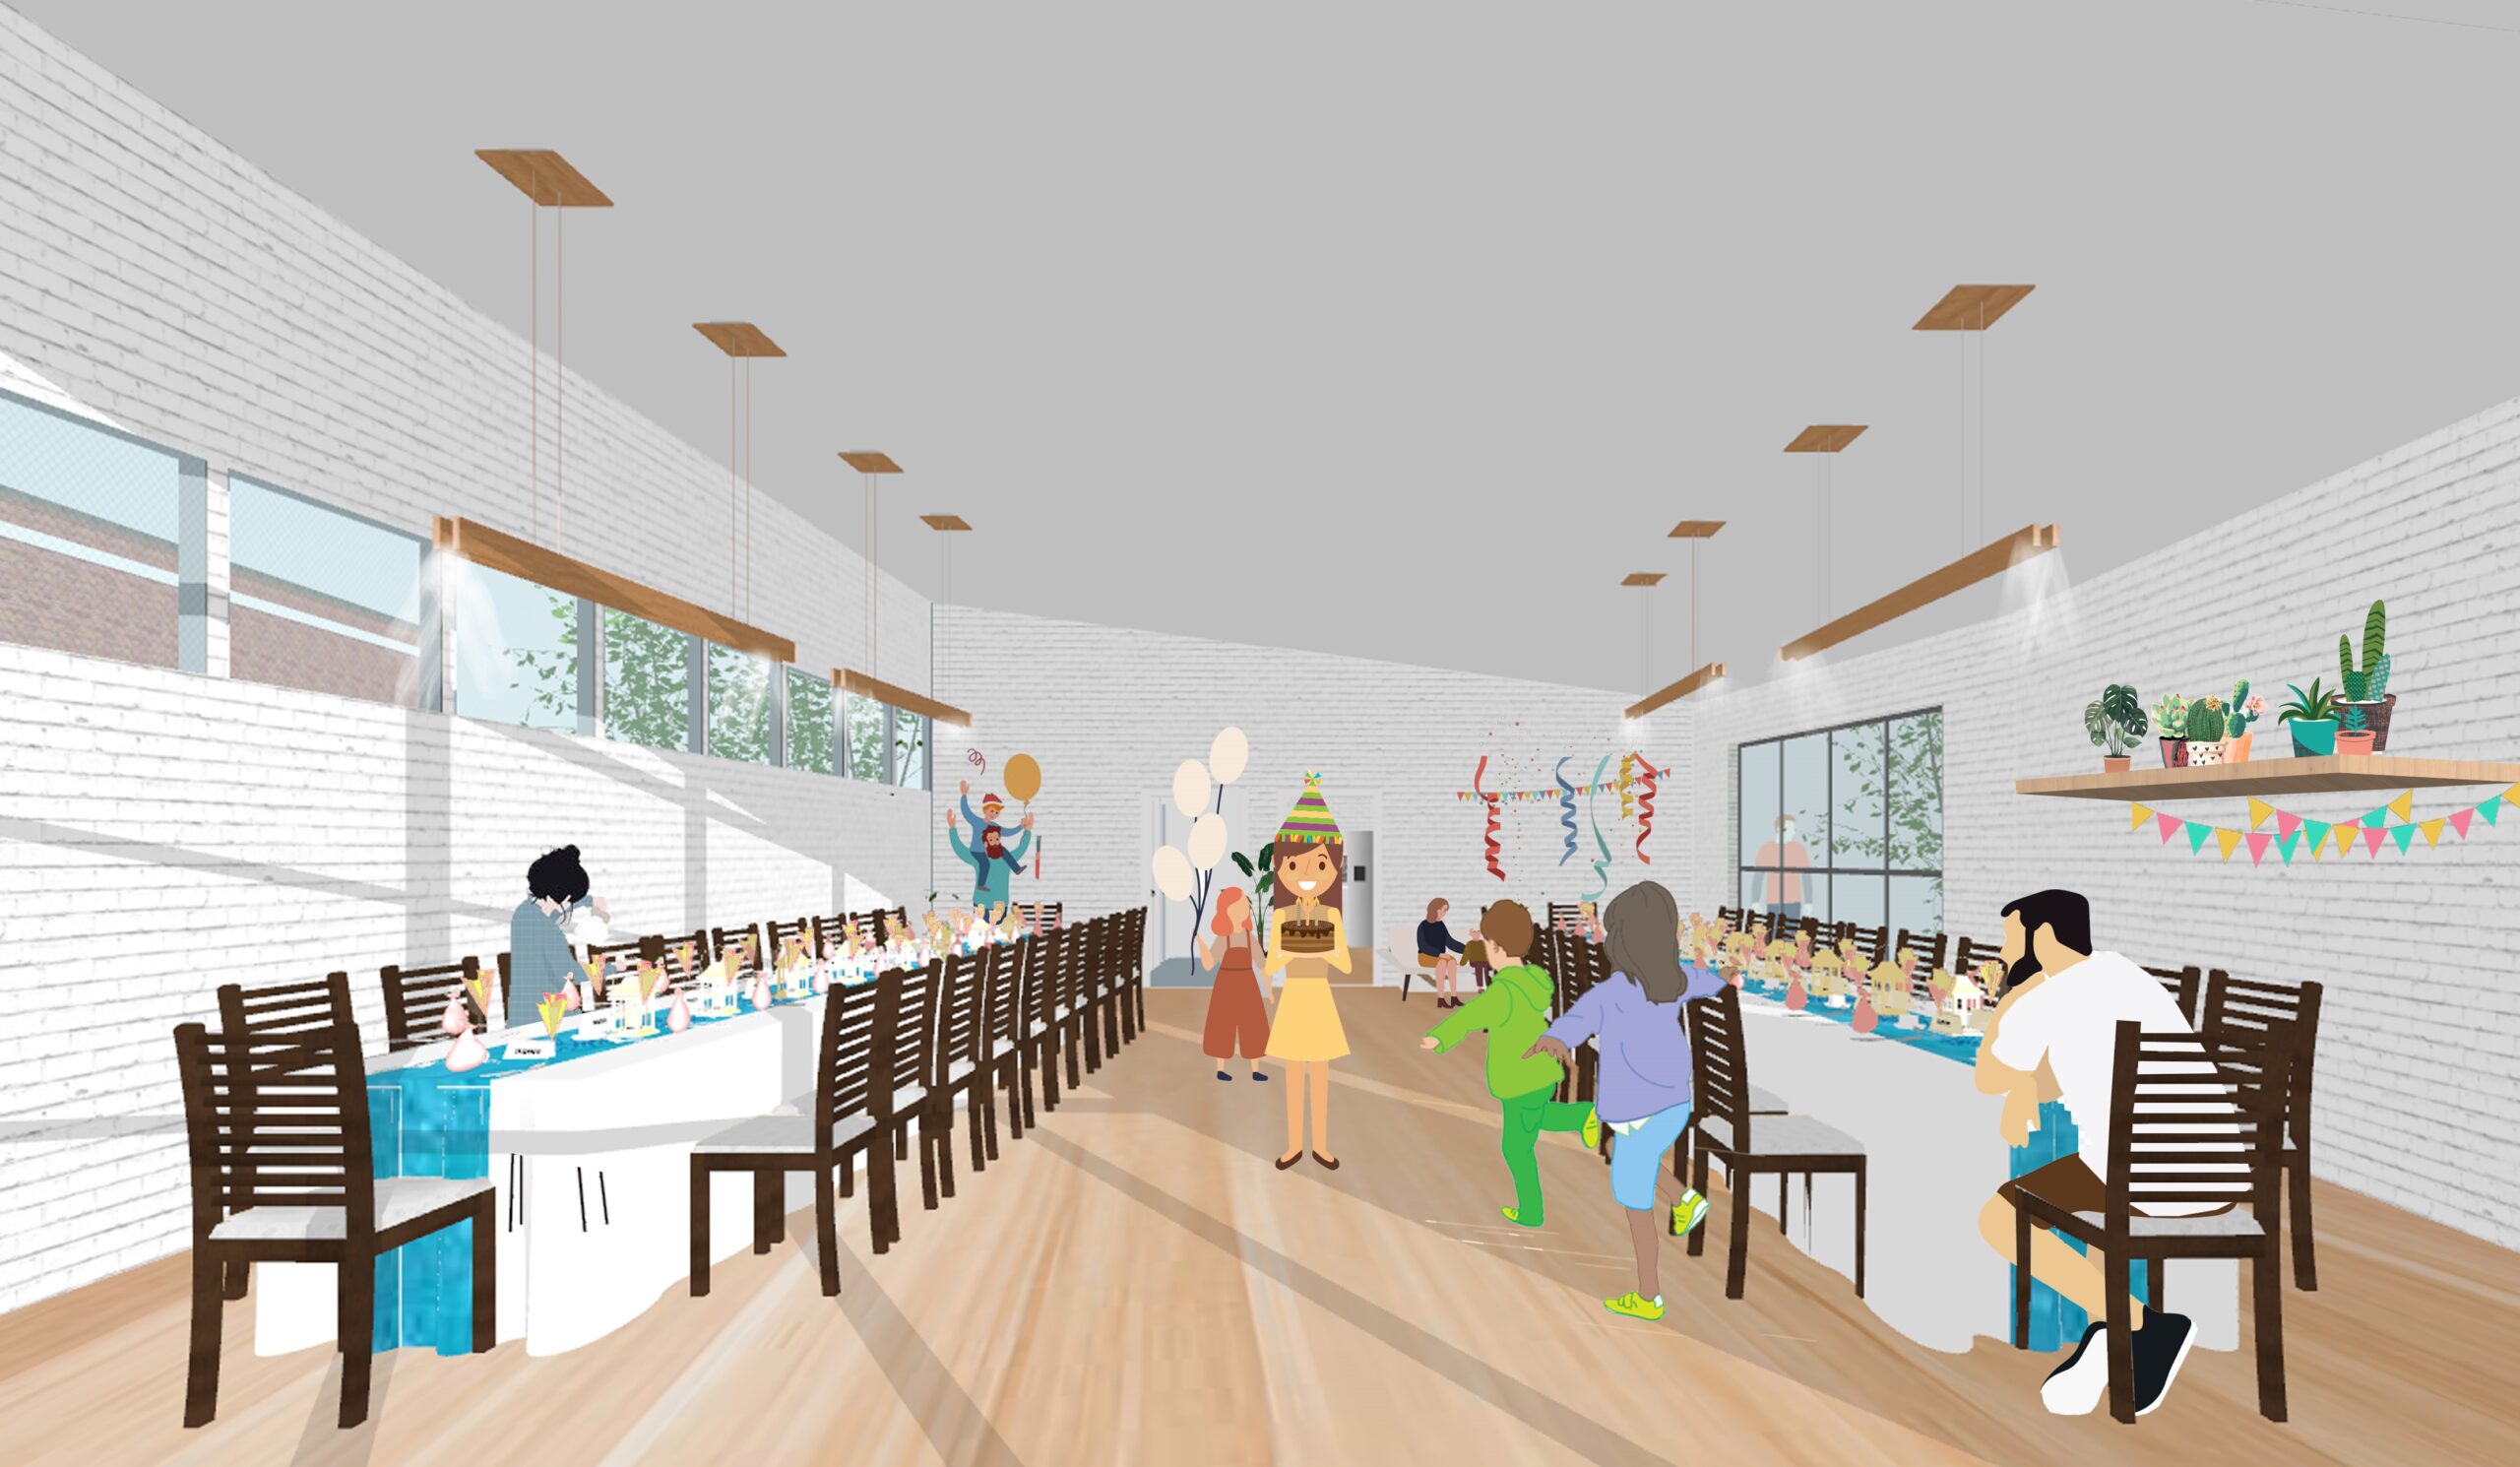 Person depicated in the centre of the image, tables to either side of her illustrating the setting of the cafe